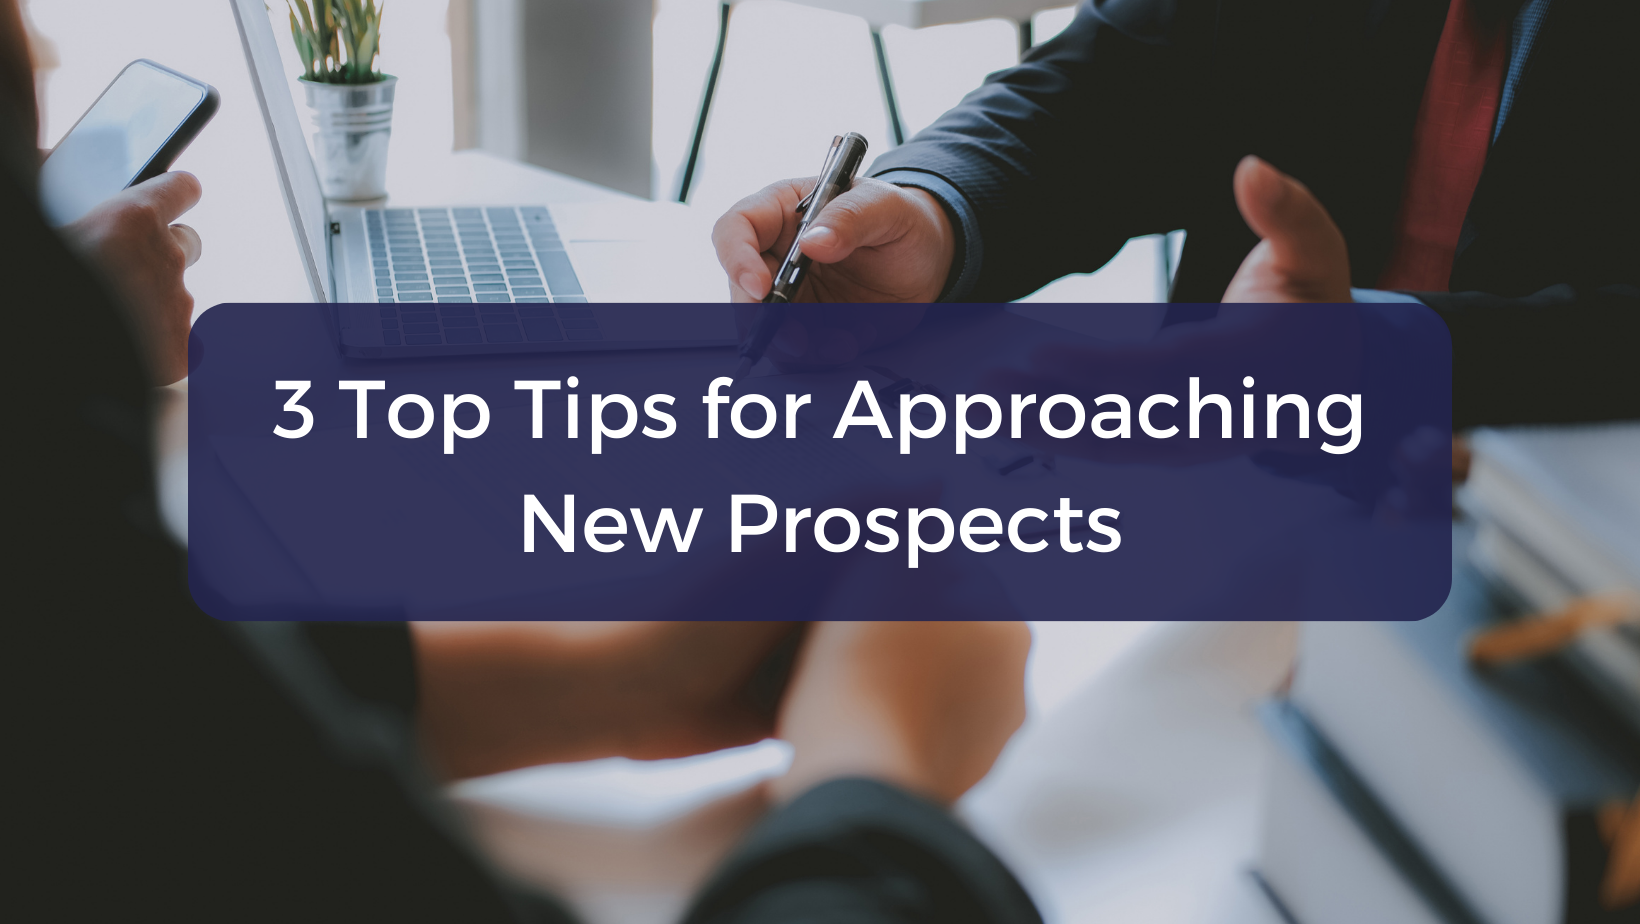 3 Top Tips for Approaching New Prospects